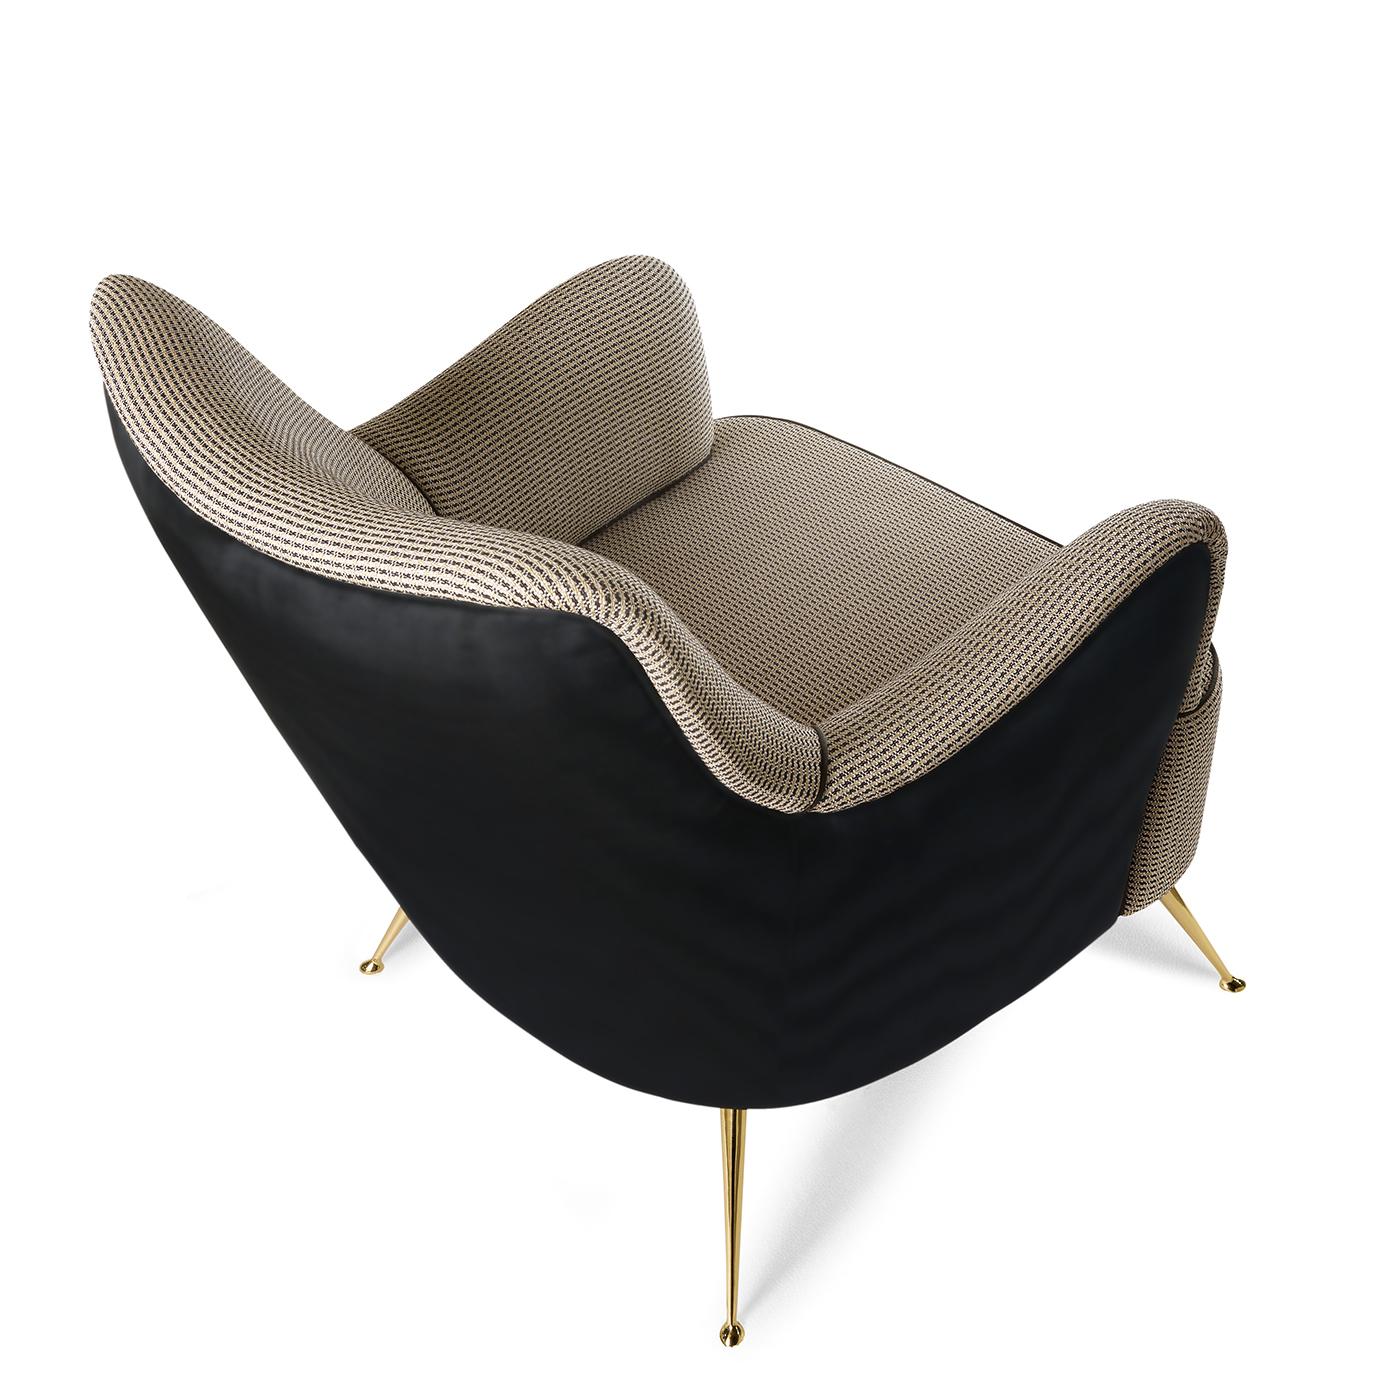 The effortless elegance of midcentury furniture is reinterpreted in this sophisticated armchair that will enrich the look of a modern or vintage-inspired interior. The solid wood structure, with its comfortably tilted backrests and curved armrests,